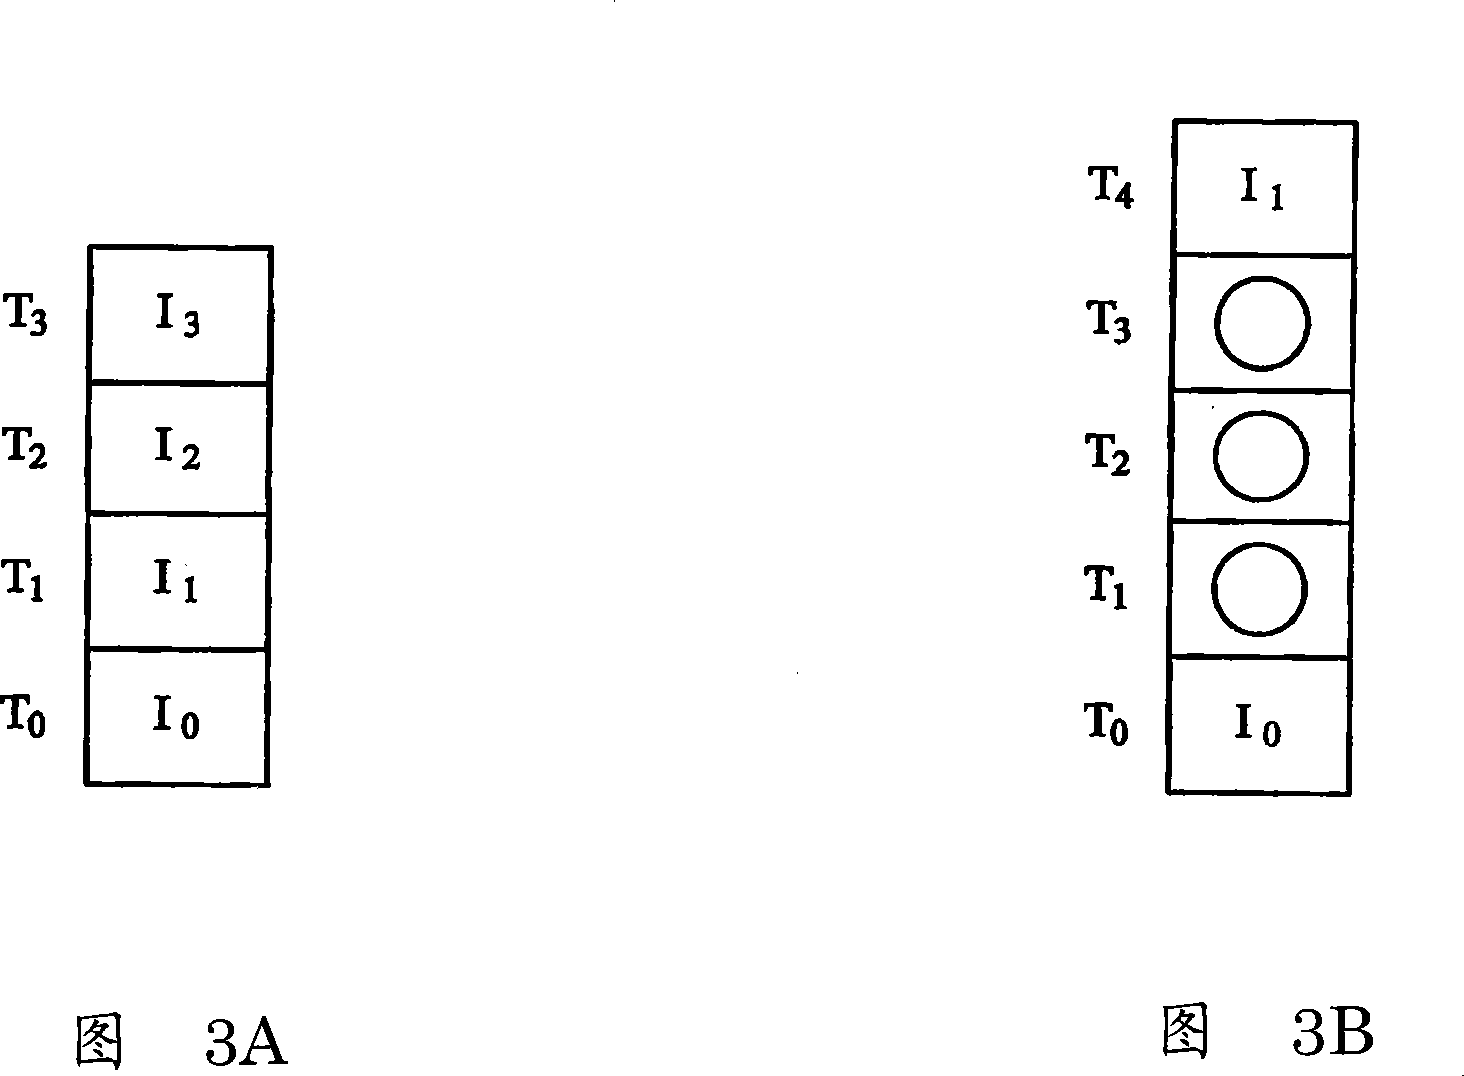 Vertex coloring device, drawing treatment unit and relative process control method